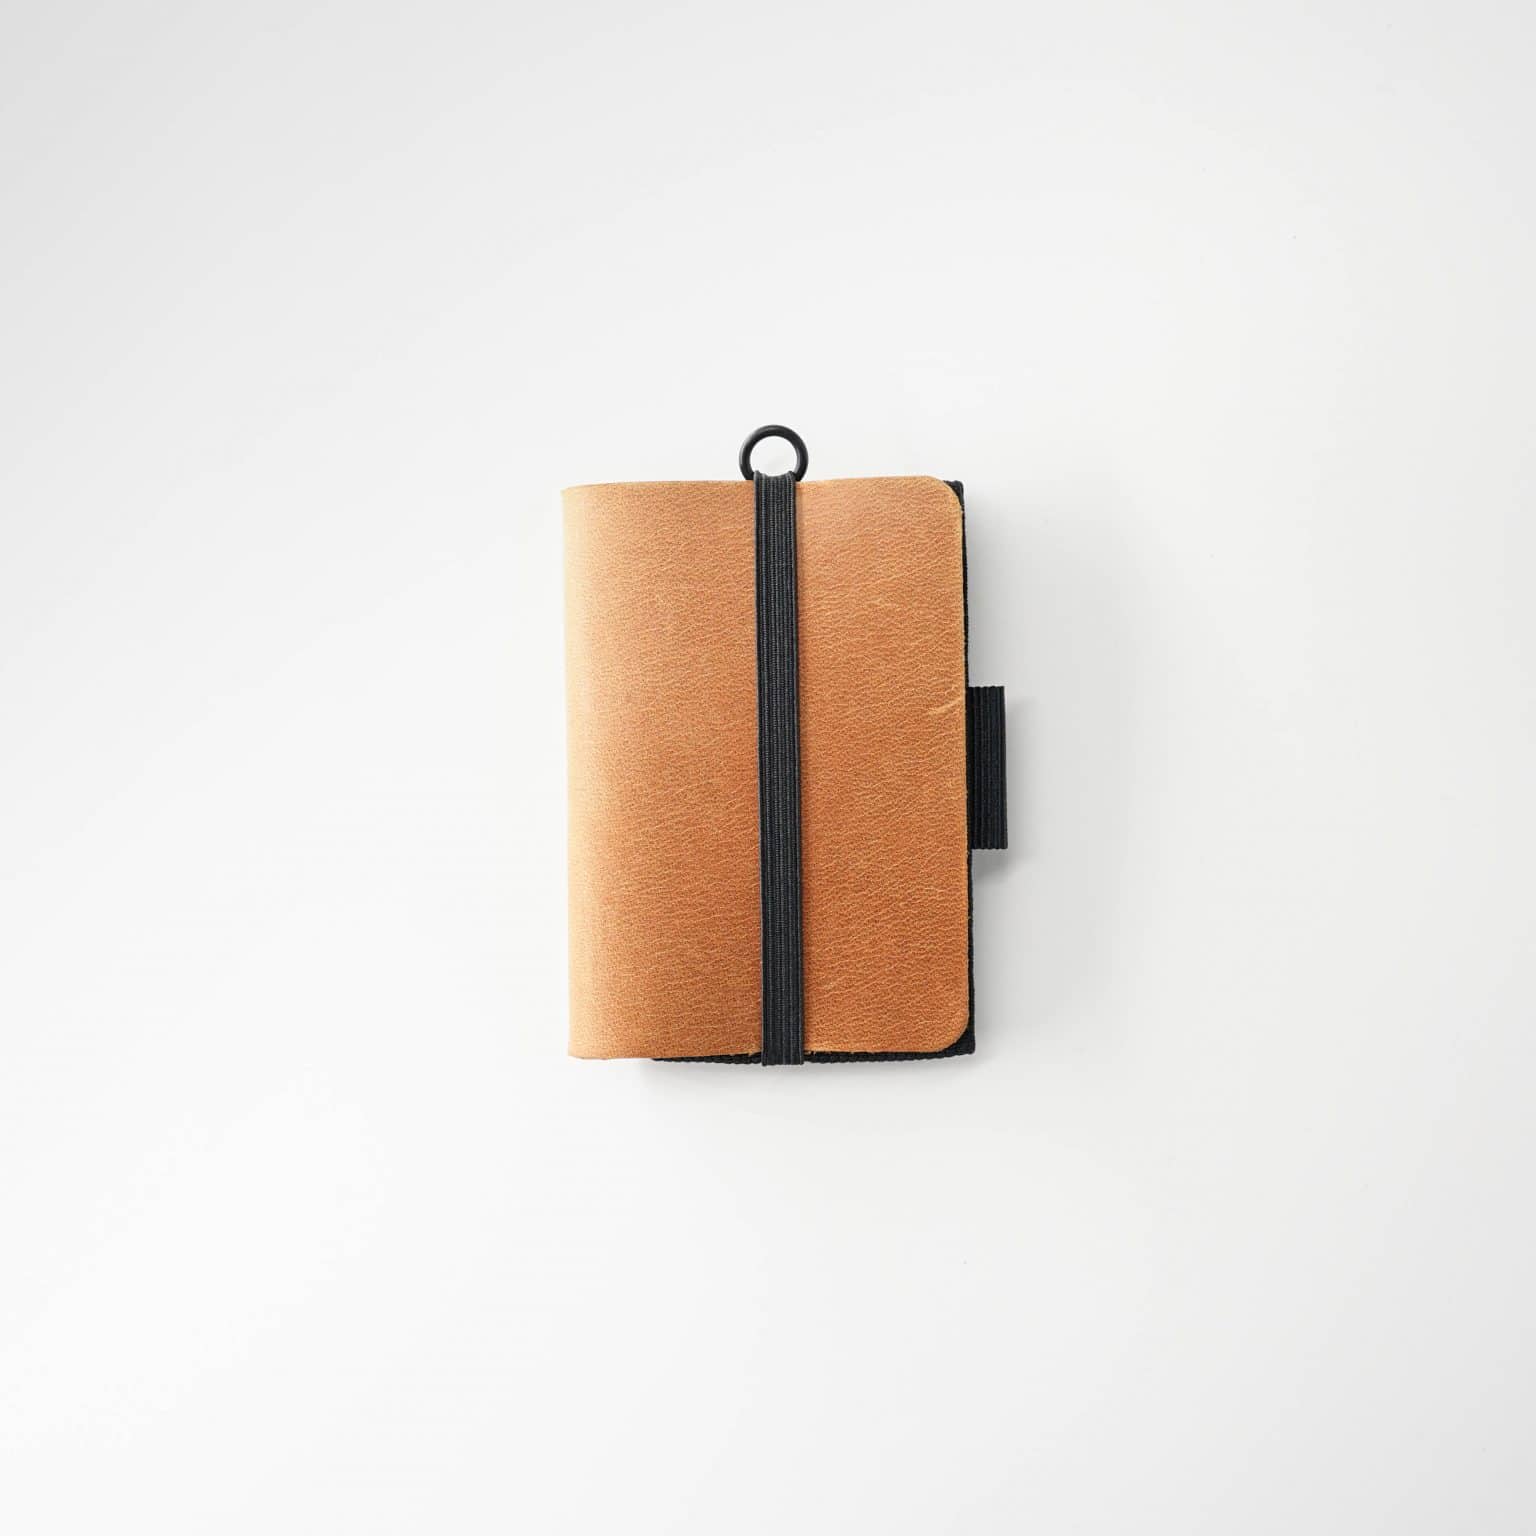 Minimalist leather wallet with innovative pull-tab design.